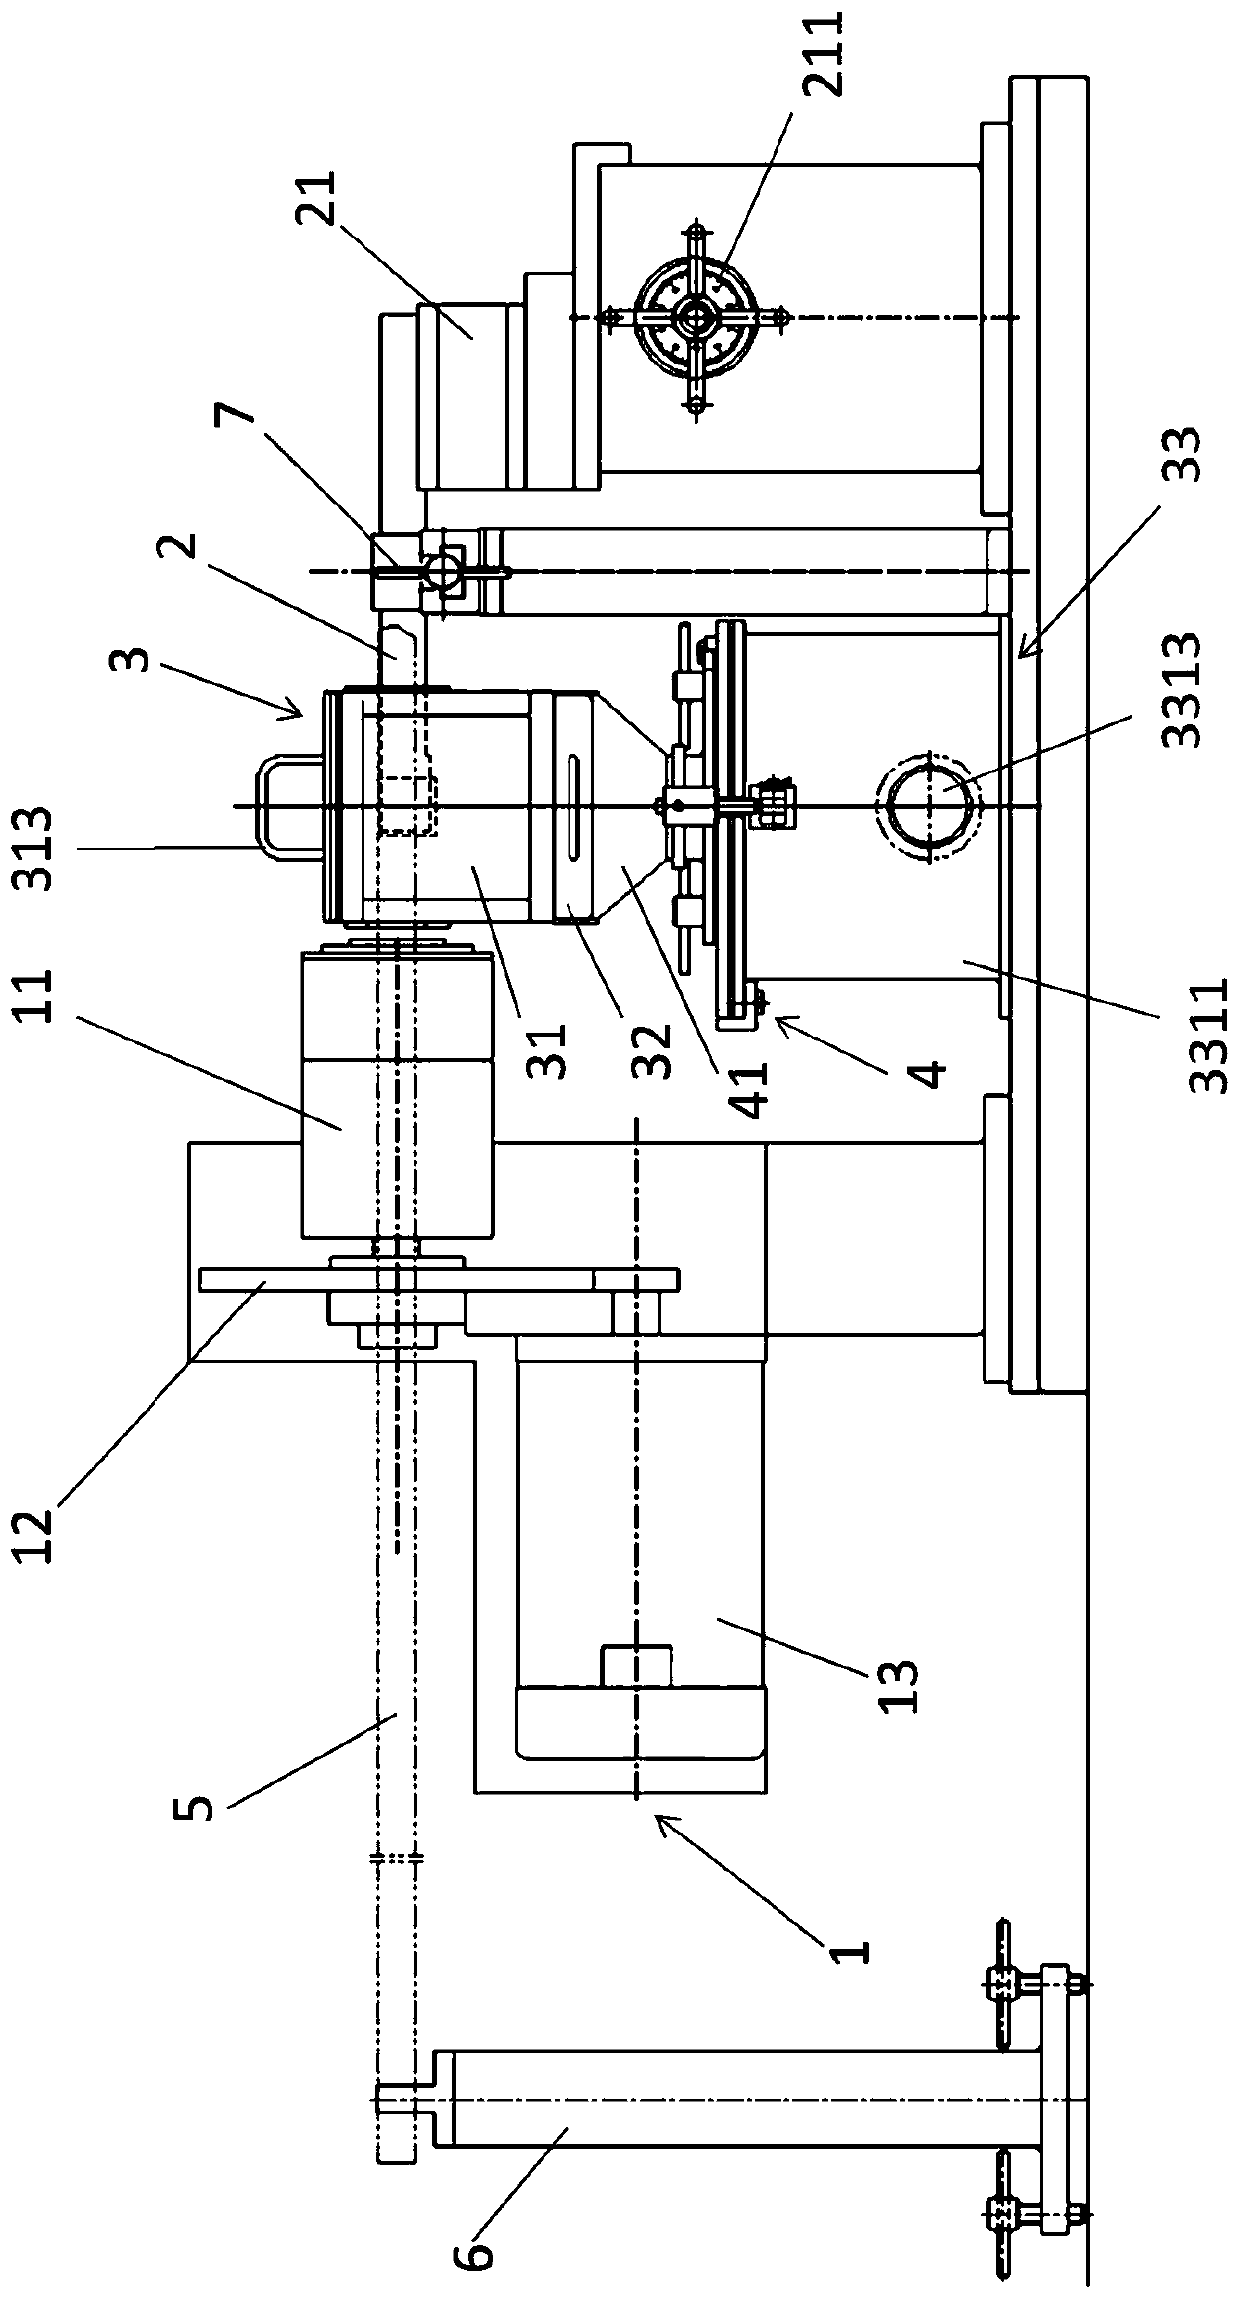 Spent fuel rod hot cell cutting device